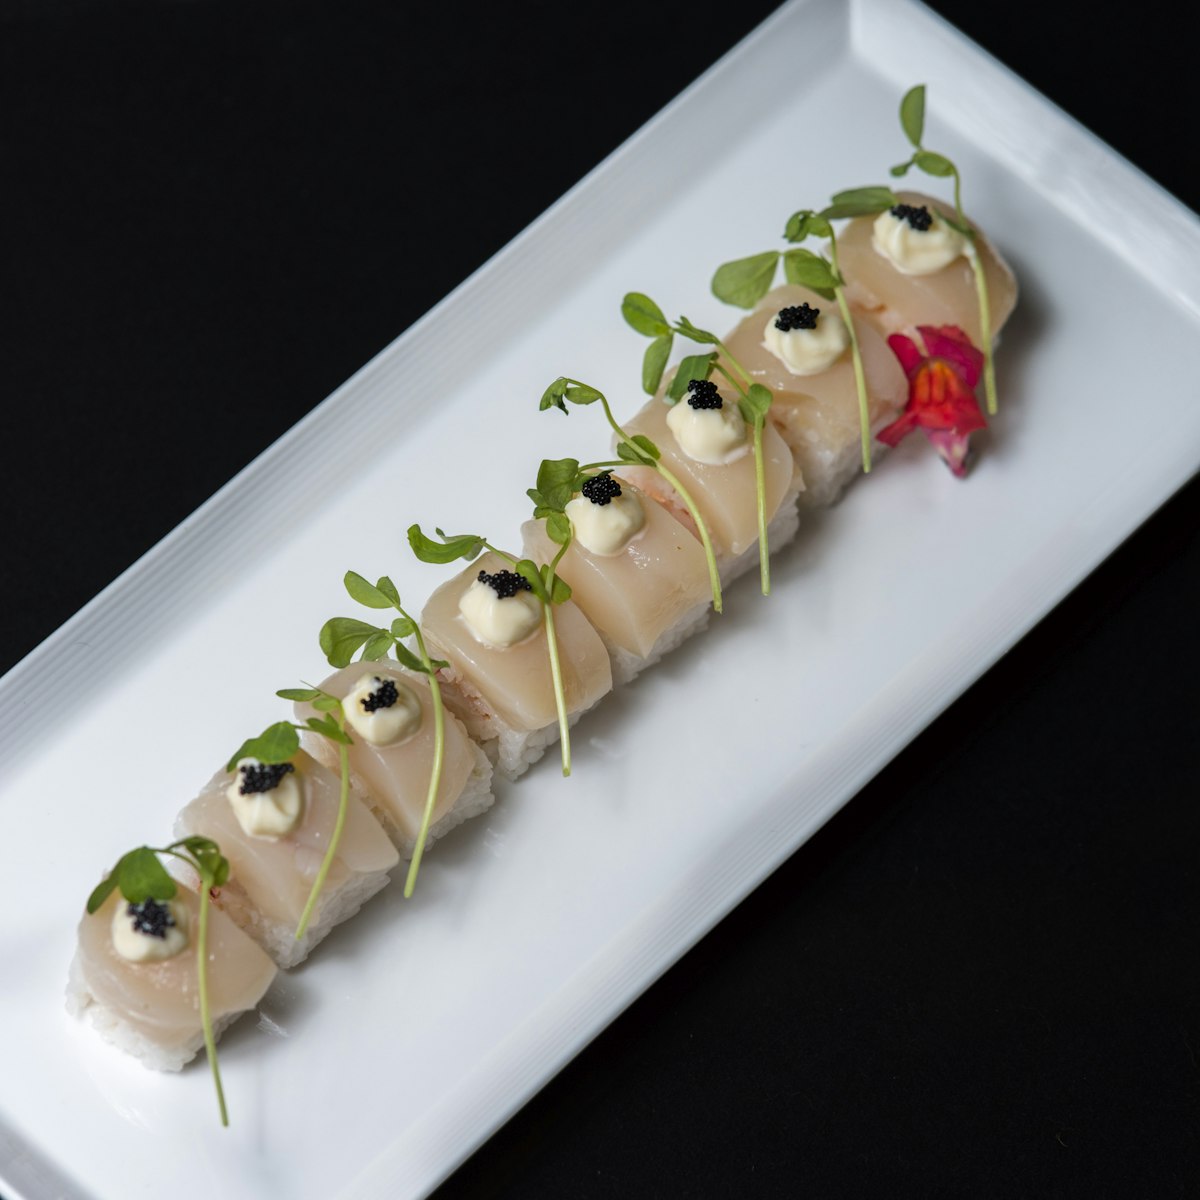 Scallop roll with black tobiko caviar, mayonnaise and sprouts.